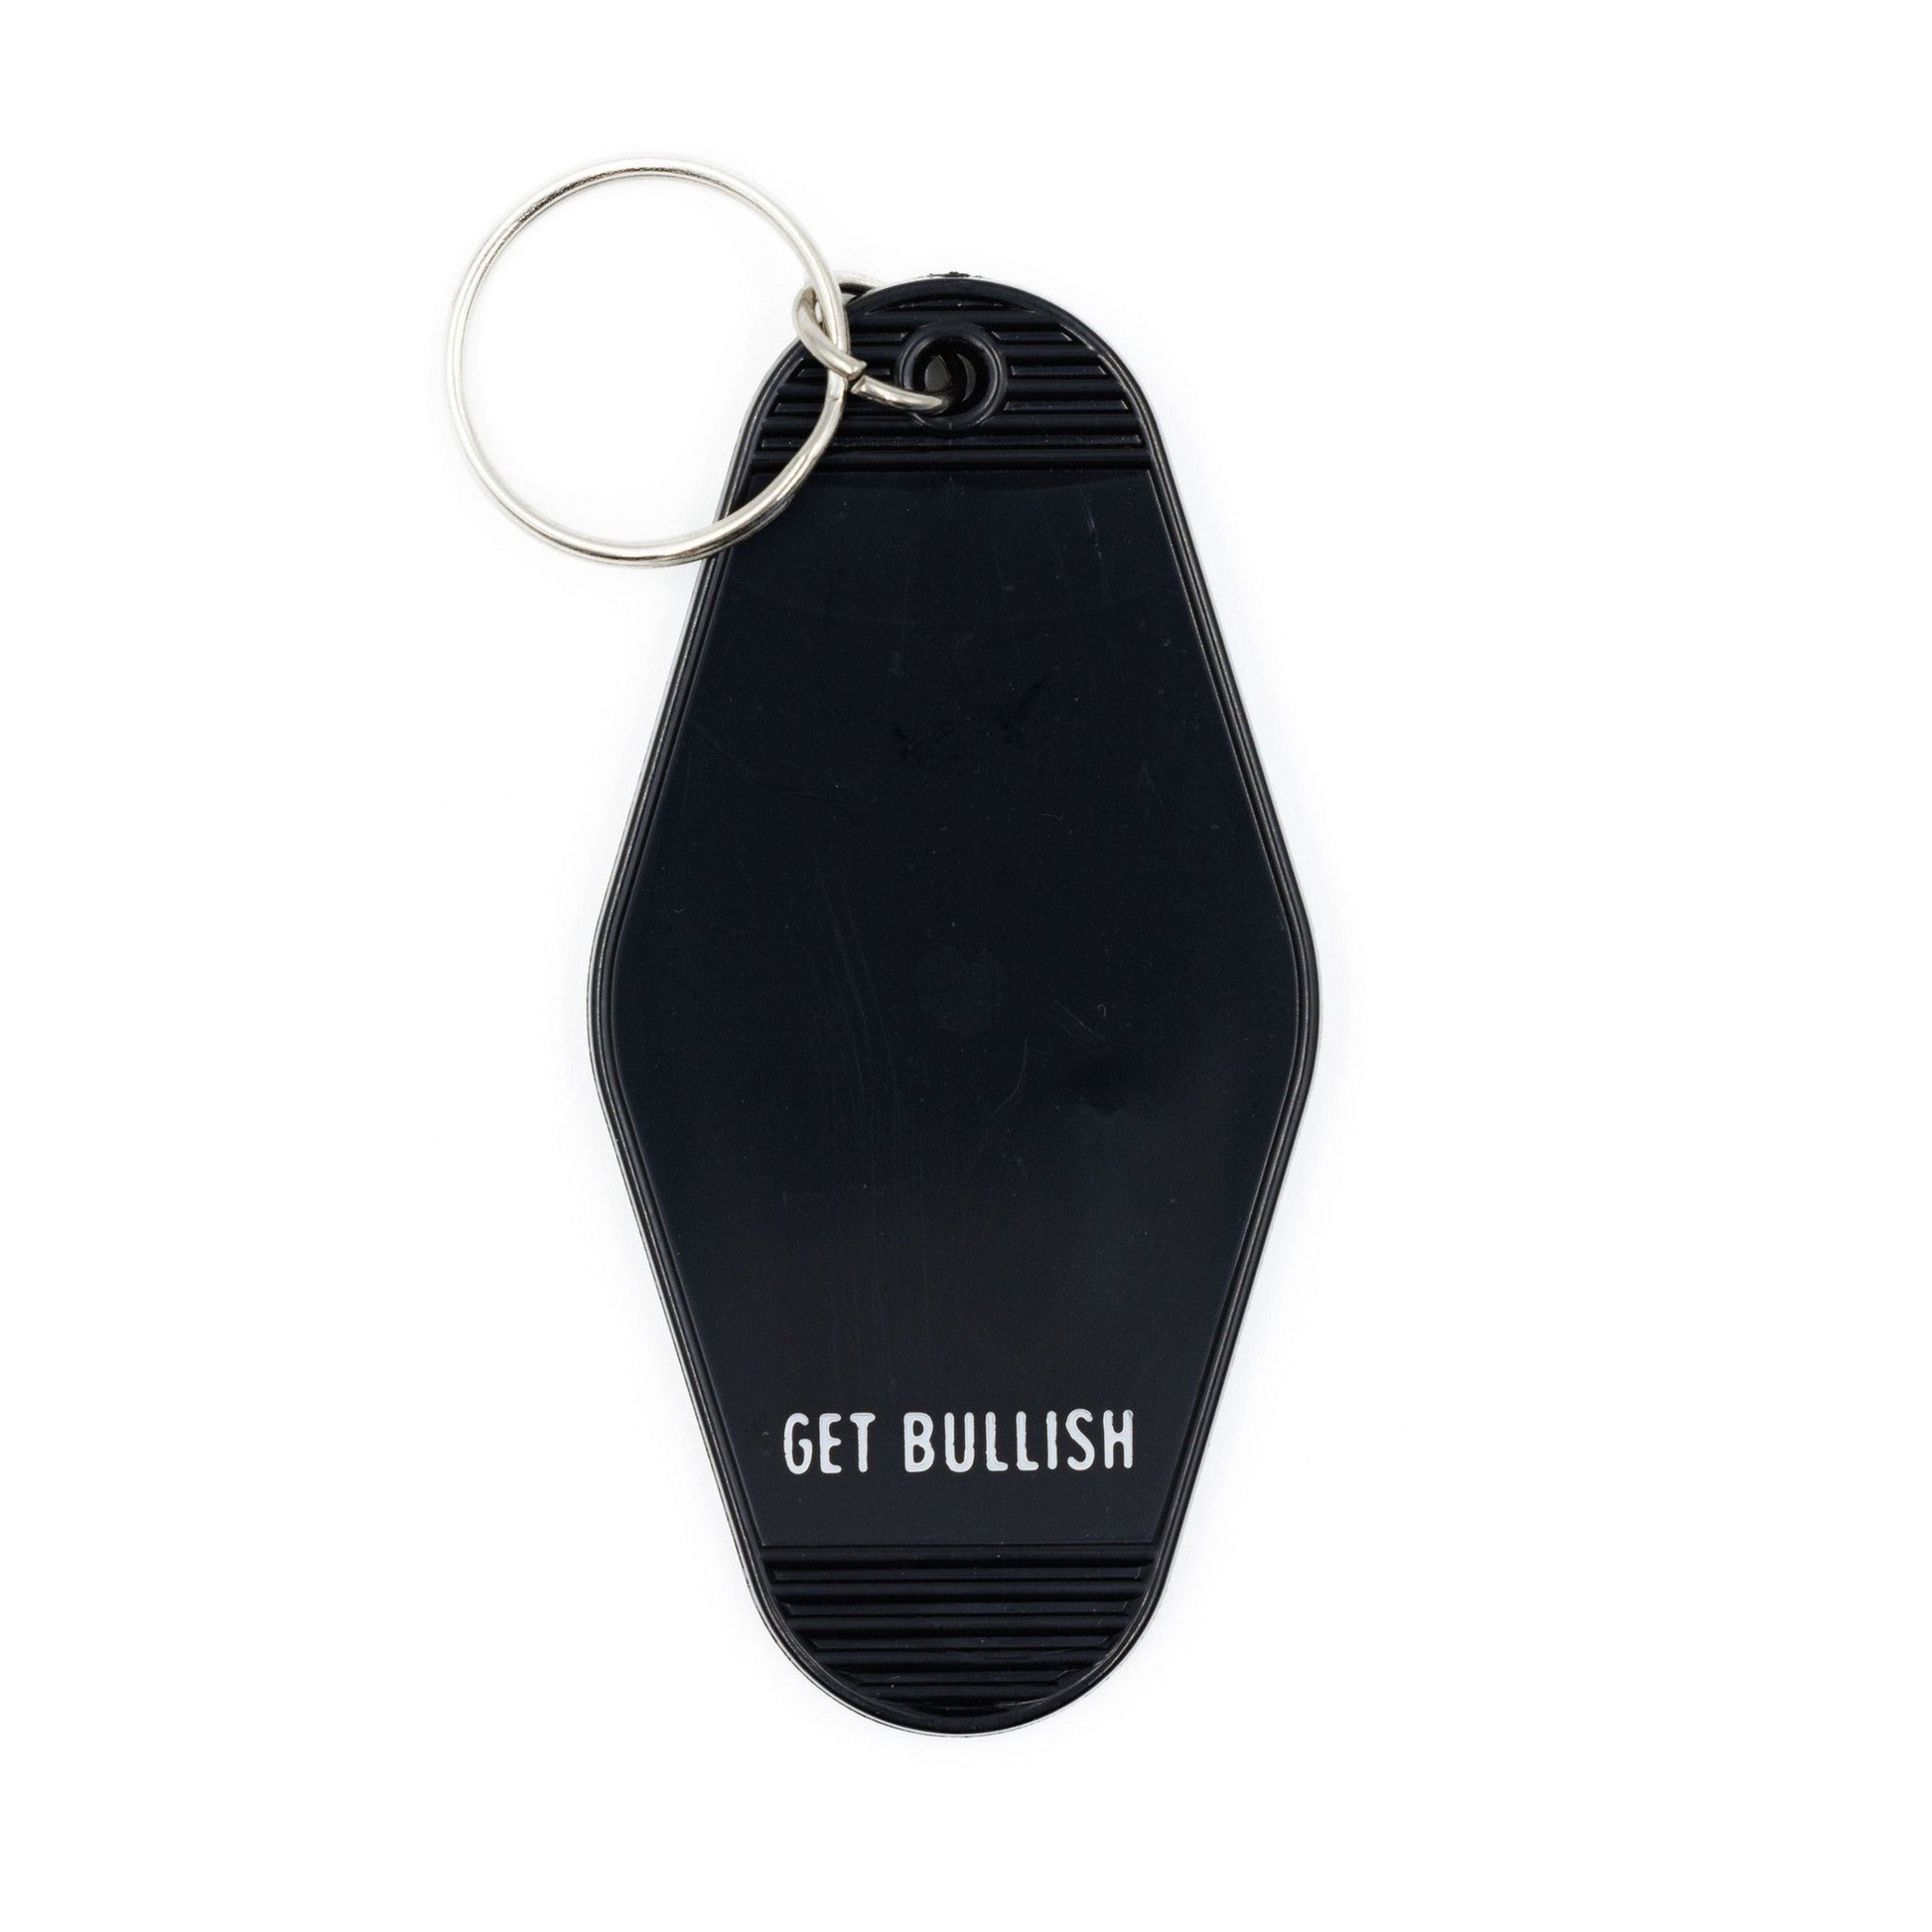 My First Crush Was Dana Scully Motel Style Keychain in Black